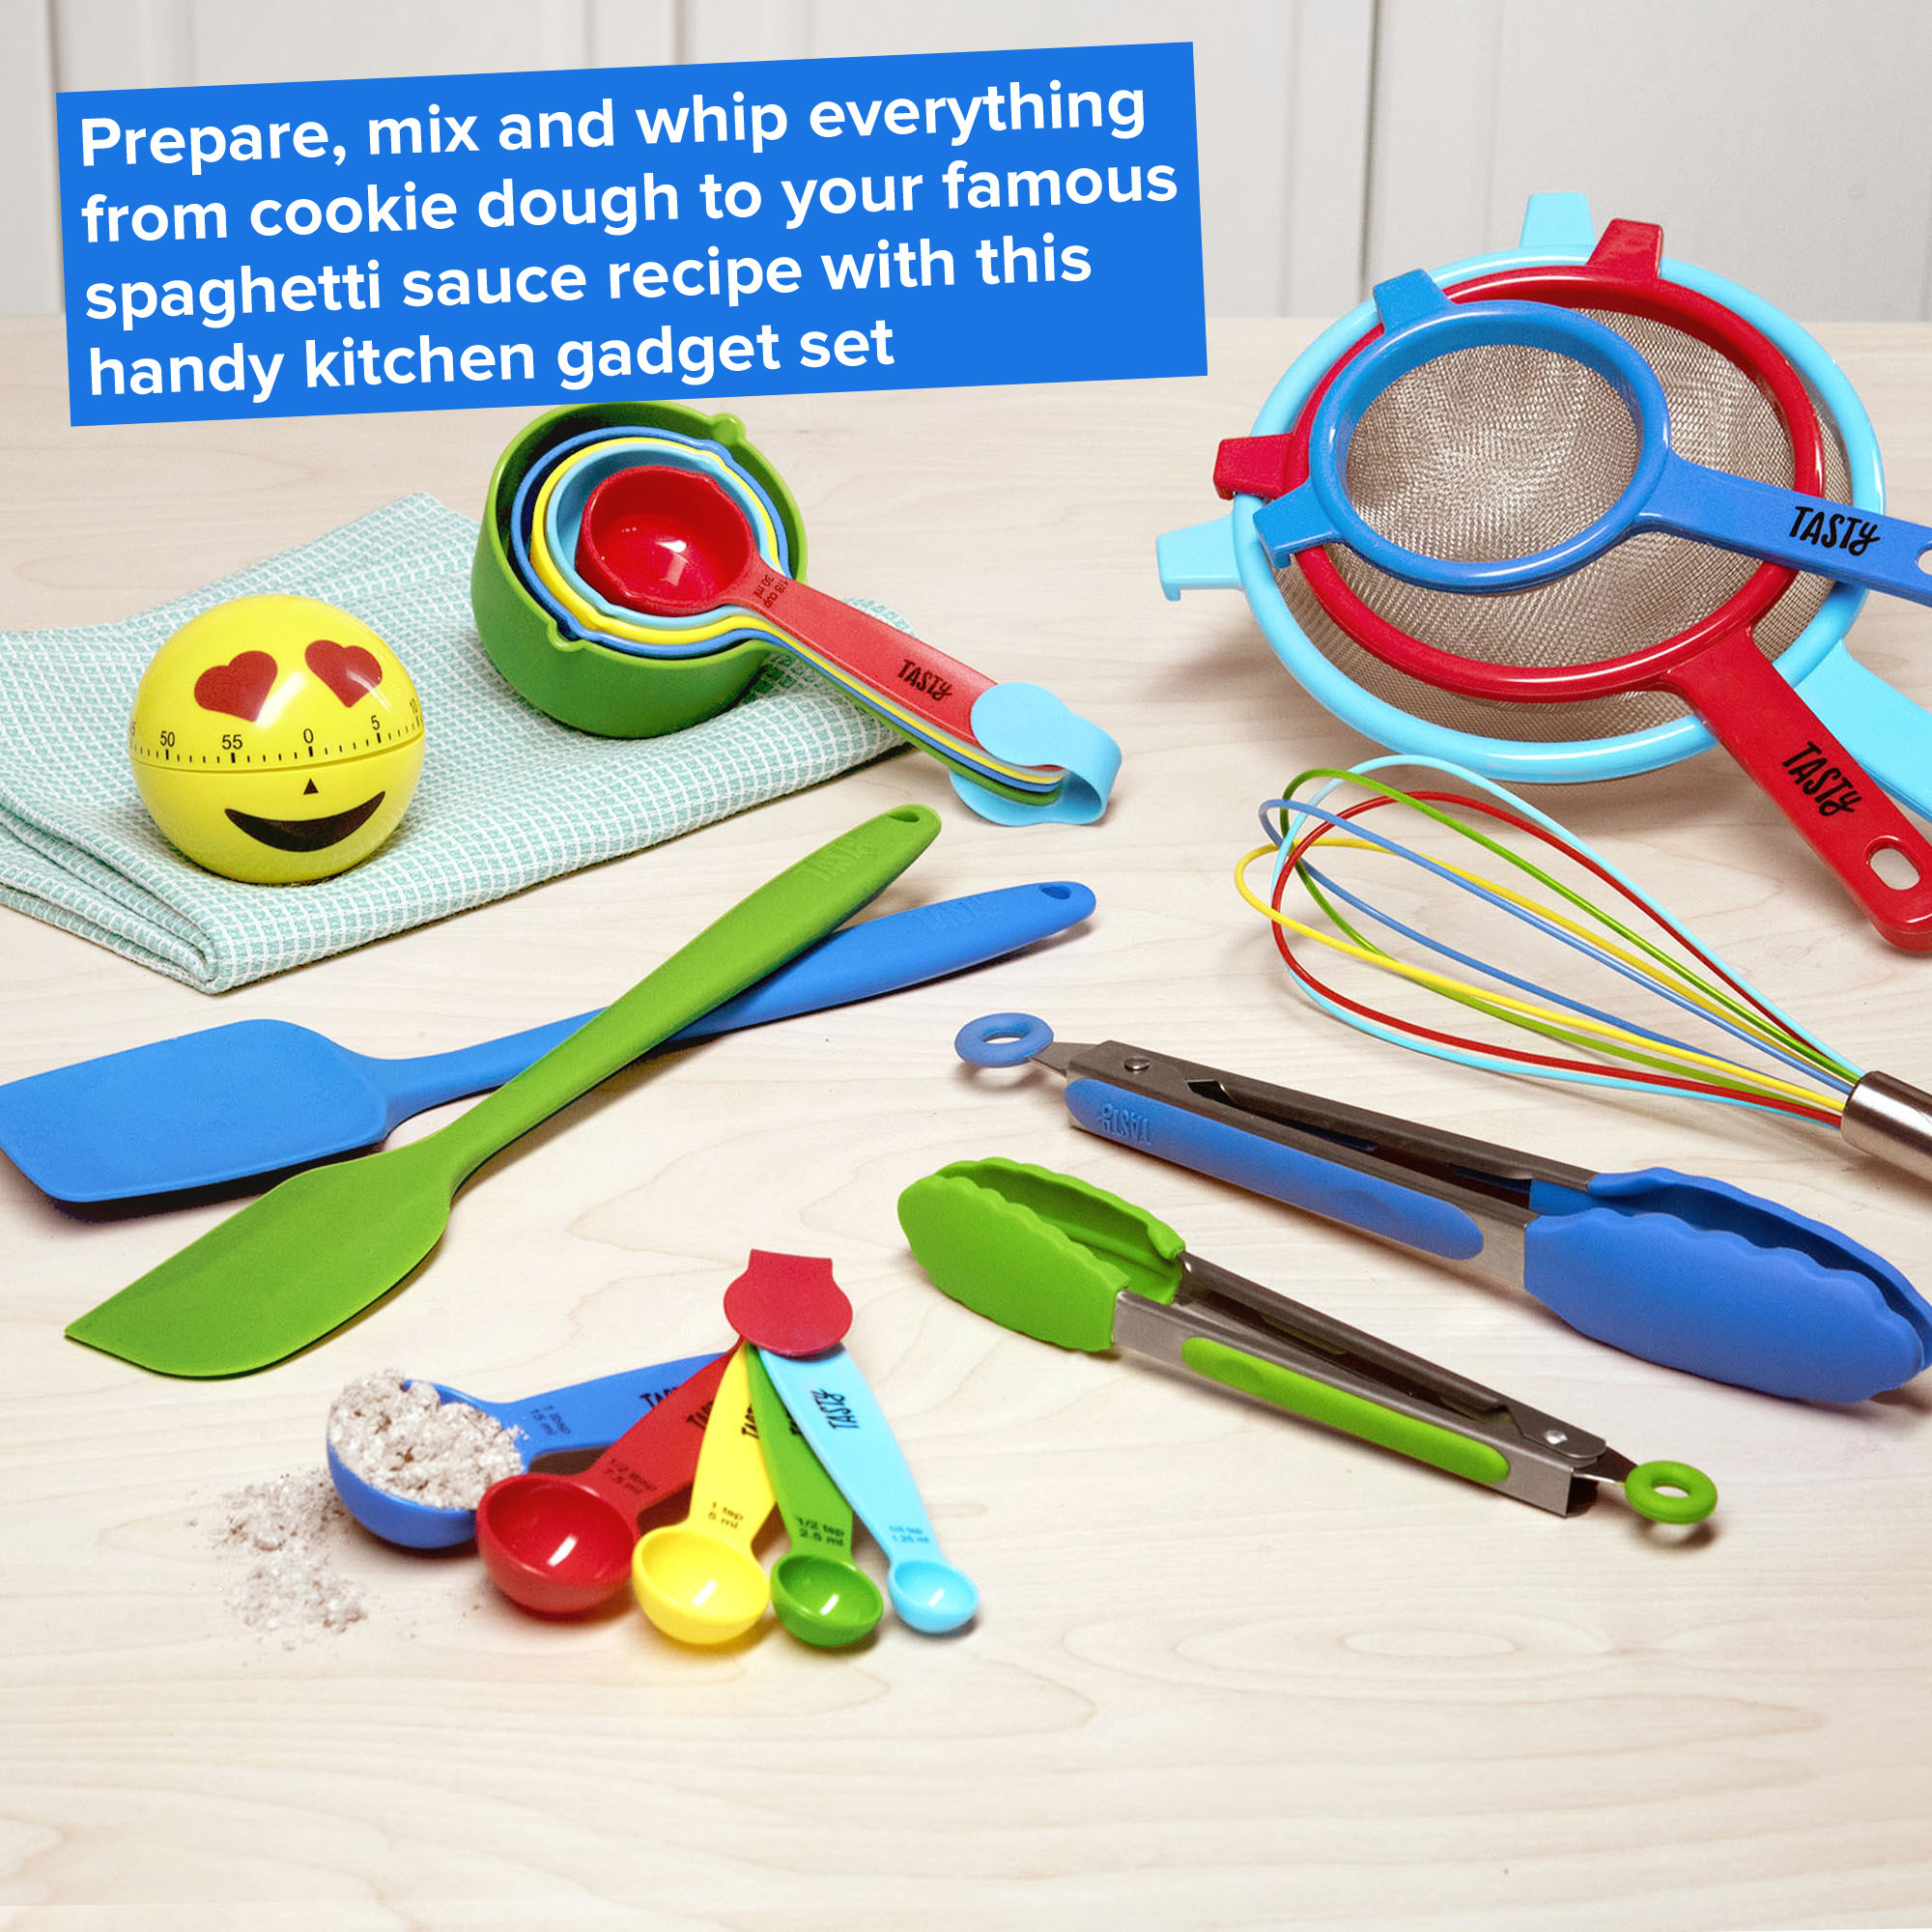 The colorful utensil set